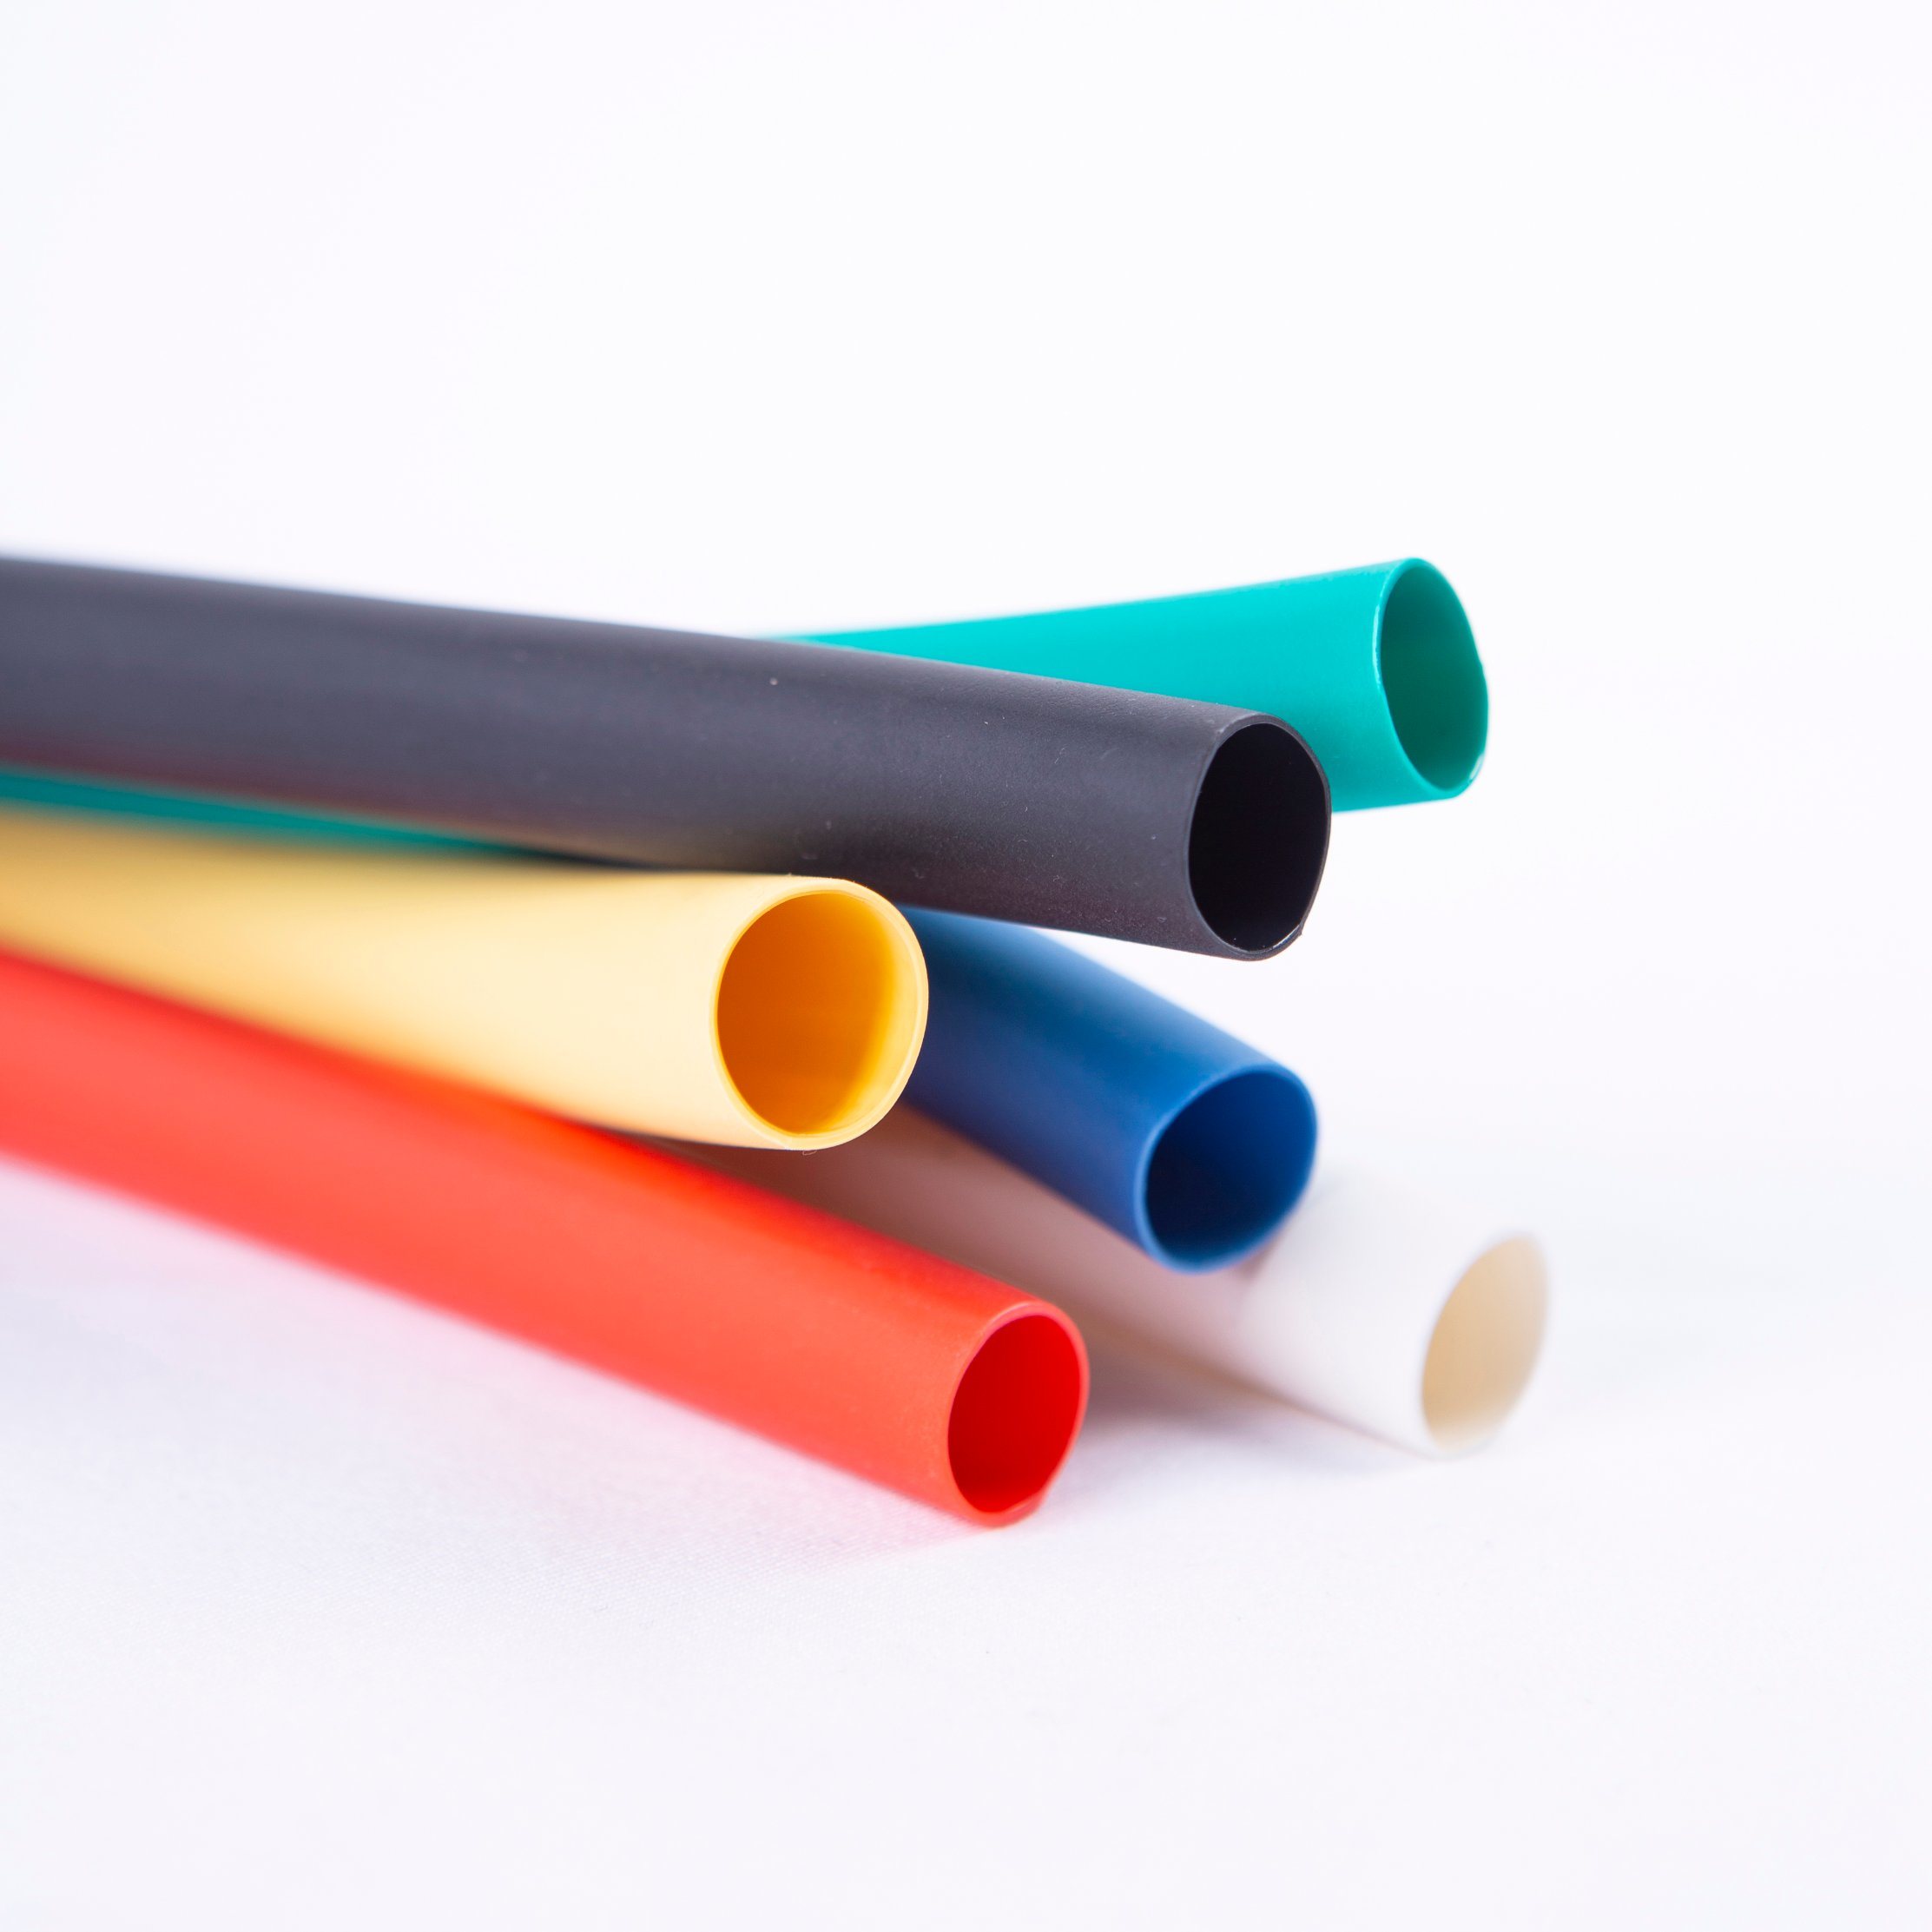 Hot Sale Dual Wall 3: 1 Heat Shrink Tube Cable Sleeves Shrink Tubing Thin Wall Heat Shrink Tubing